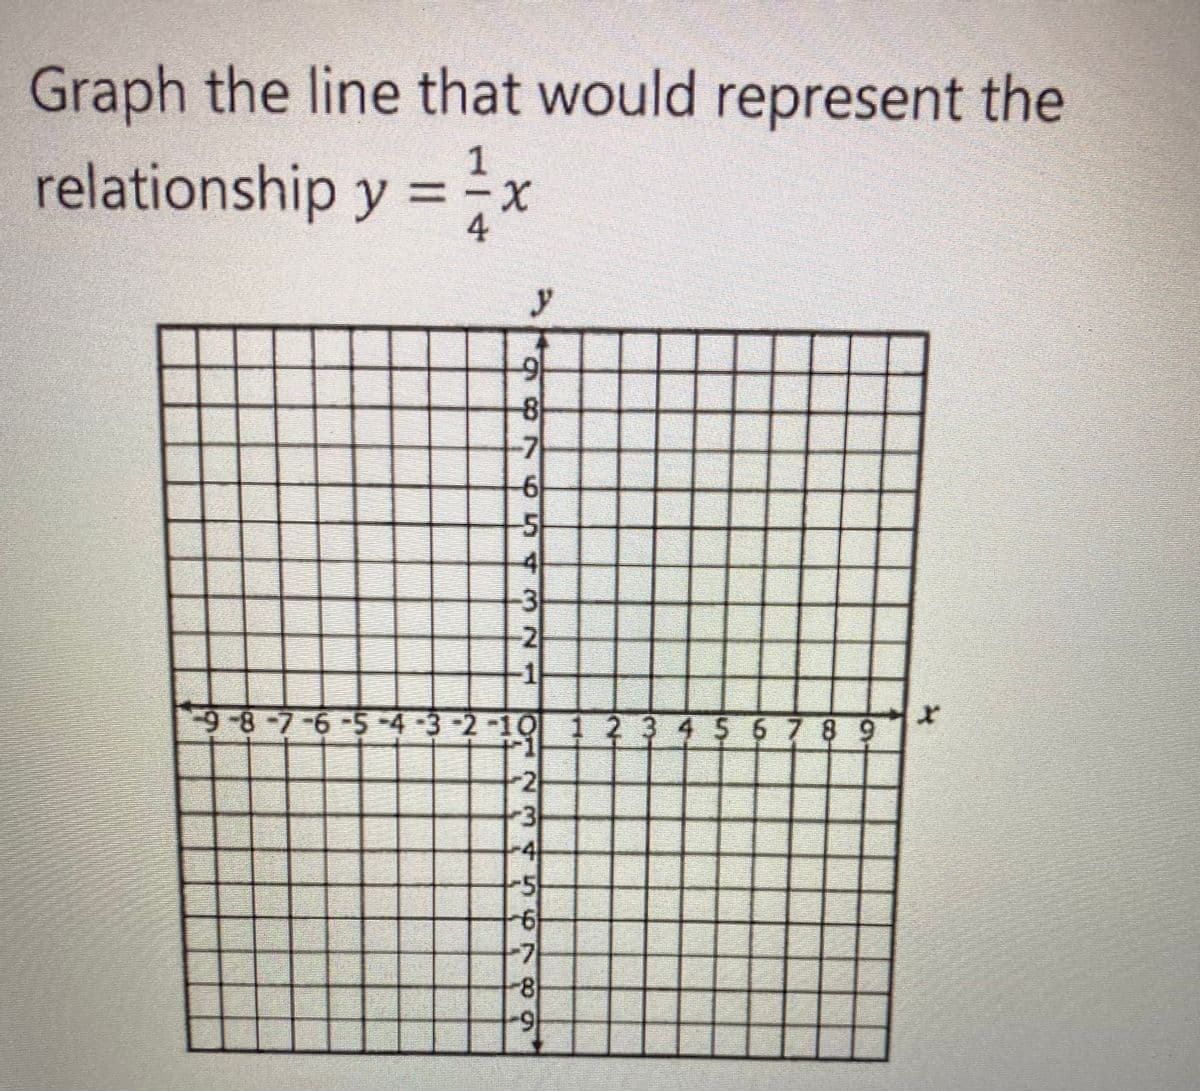 Graph the line that would represent the
relationship y =-x
4
-7
4
2-
-1-
9-8-7-6-5-4 -3 -2-10 1 2 3 4 $ 6 7 8 9
-2
-3
-4
-5
6-
-8
6.
